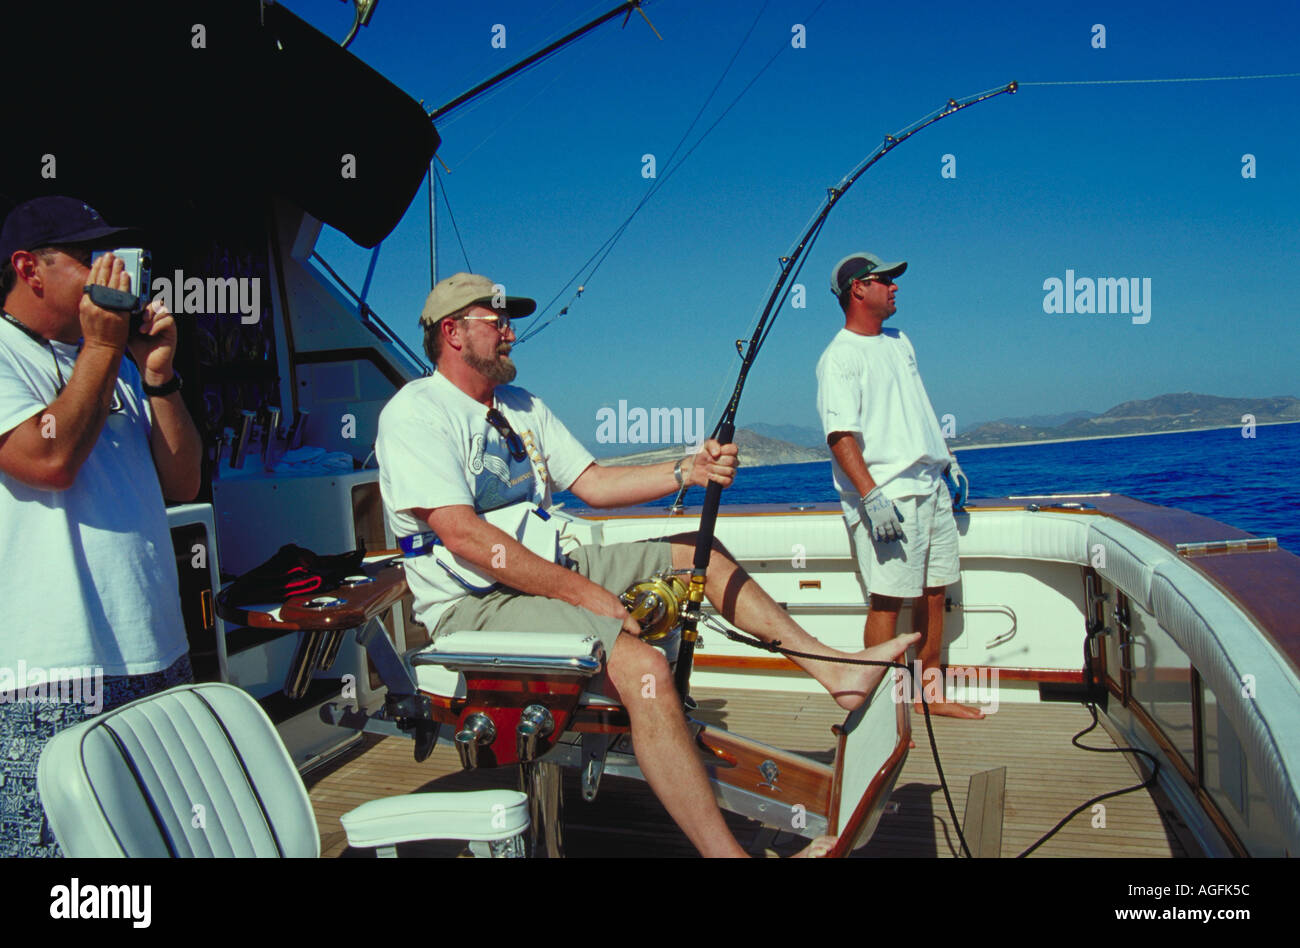 Three men on the back of a fishing boat One man seated with a fishing pole  one filming with a video camera one man watching Stock Photo - Alamy